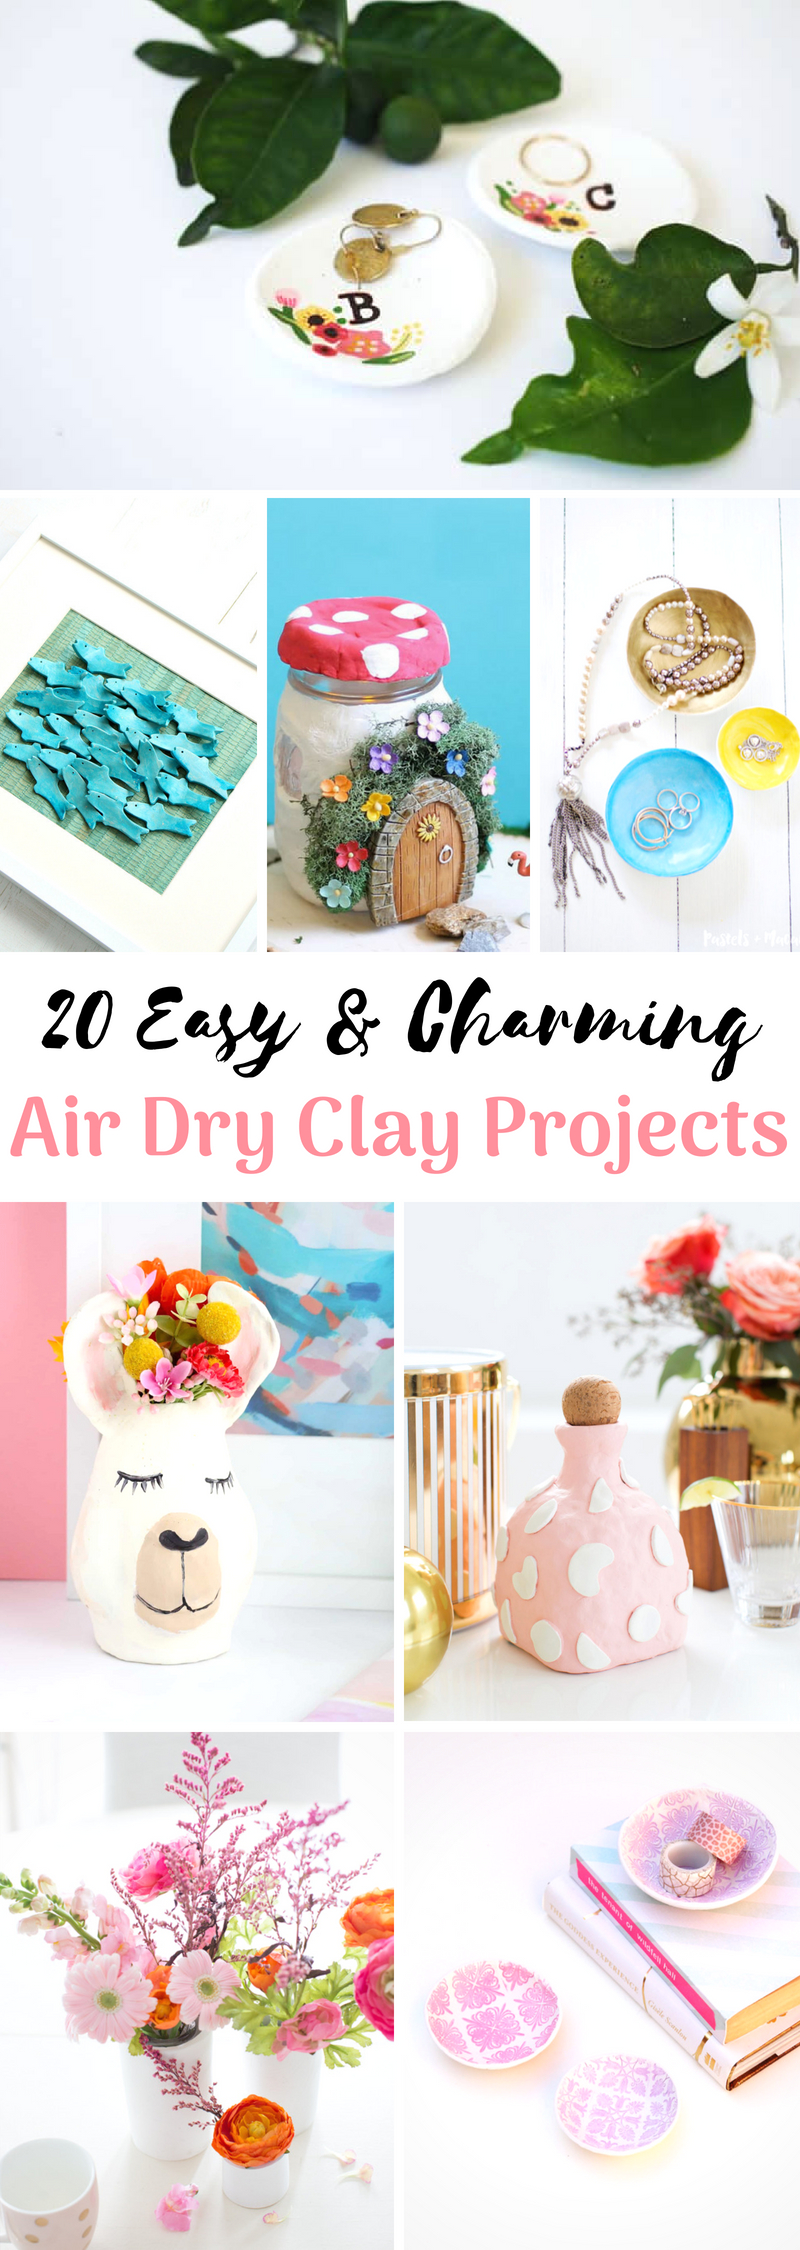 Air Dry Clay Projects 